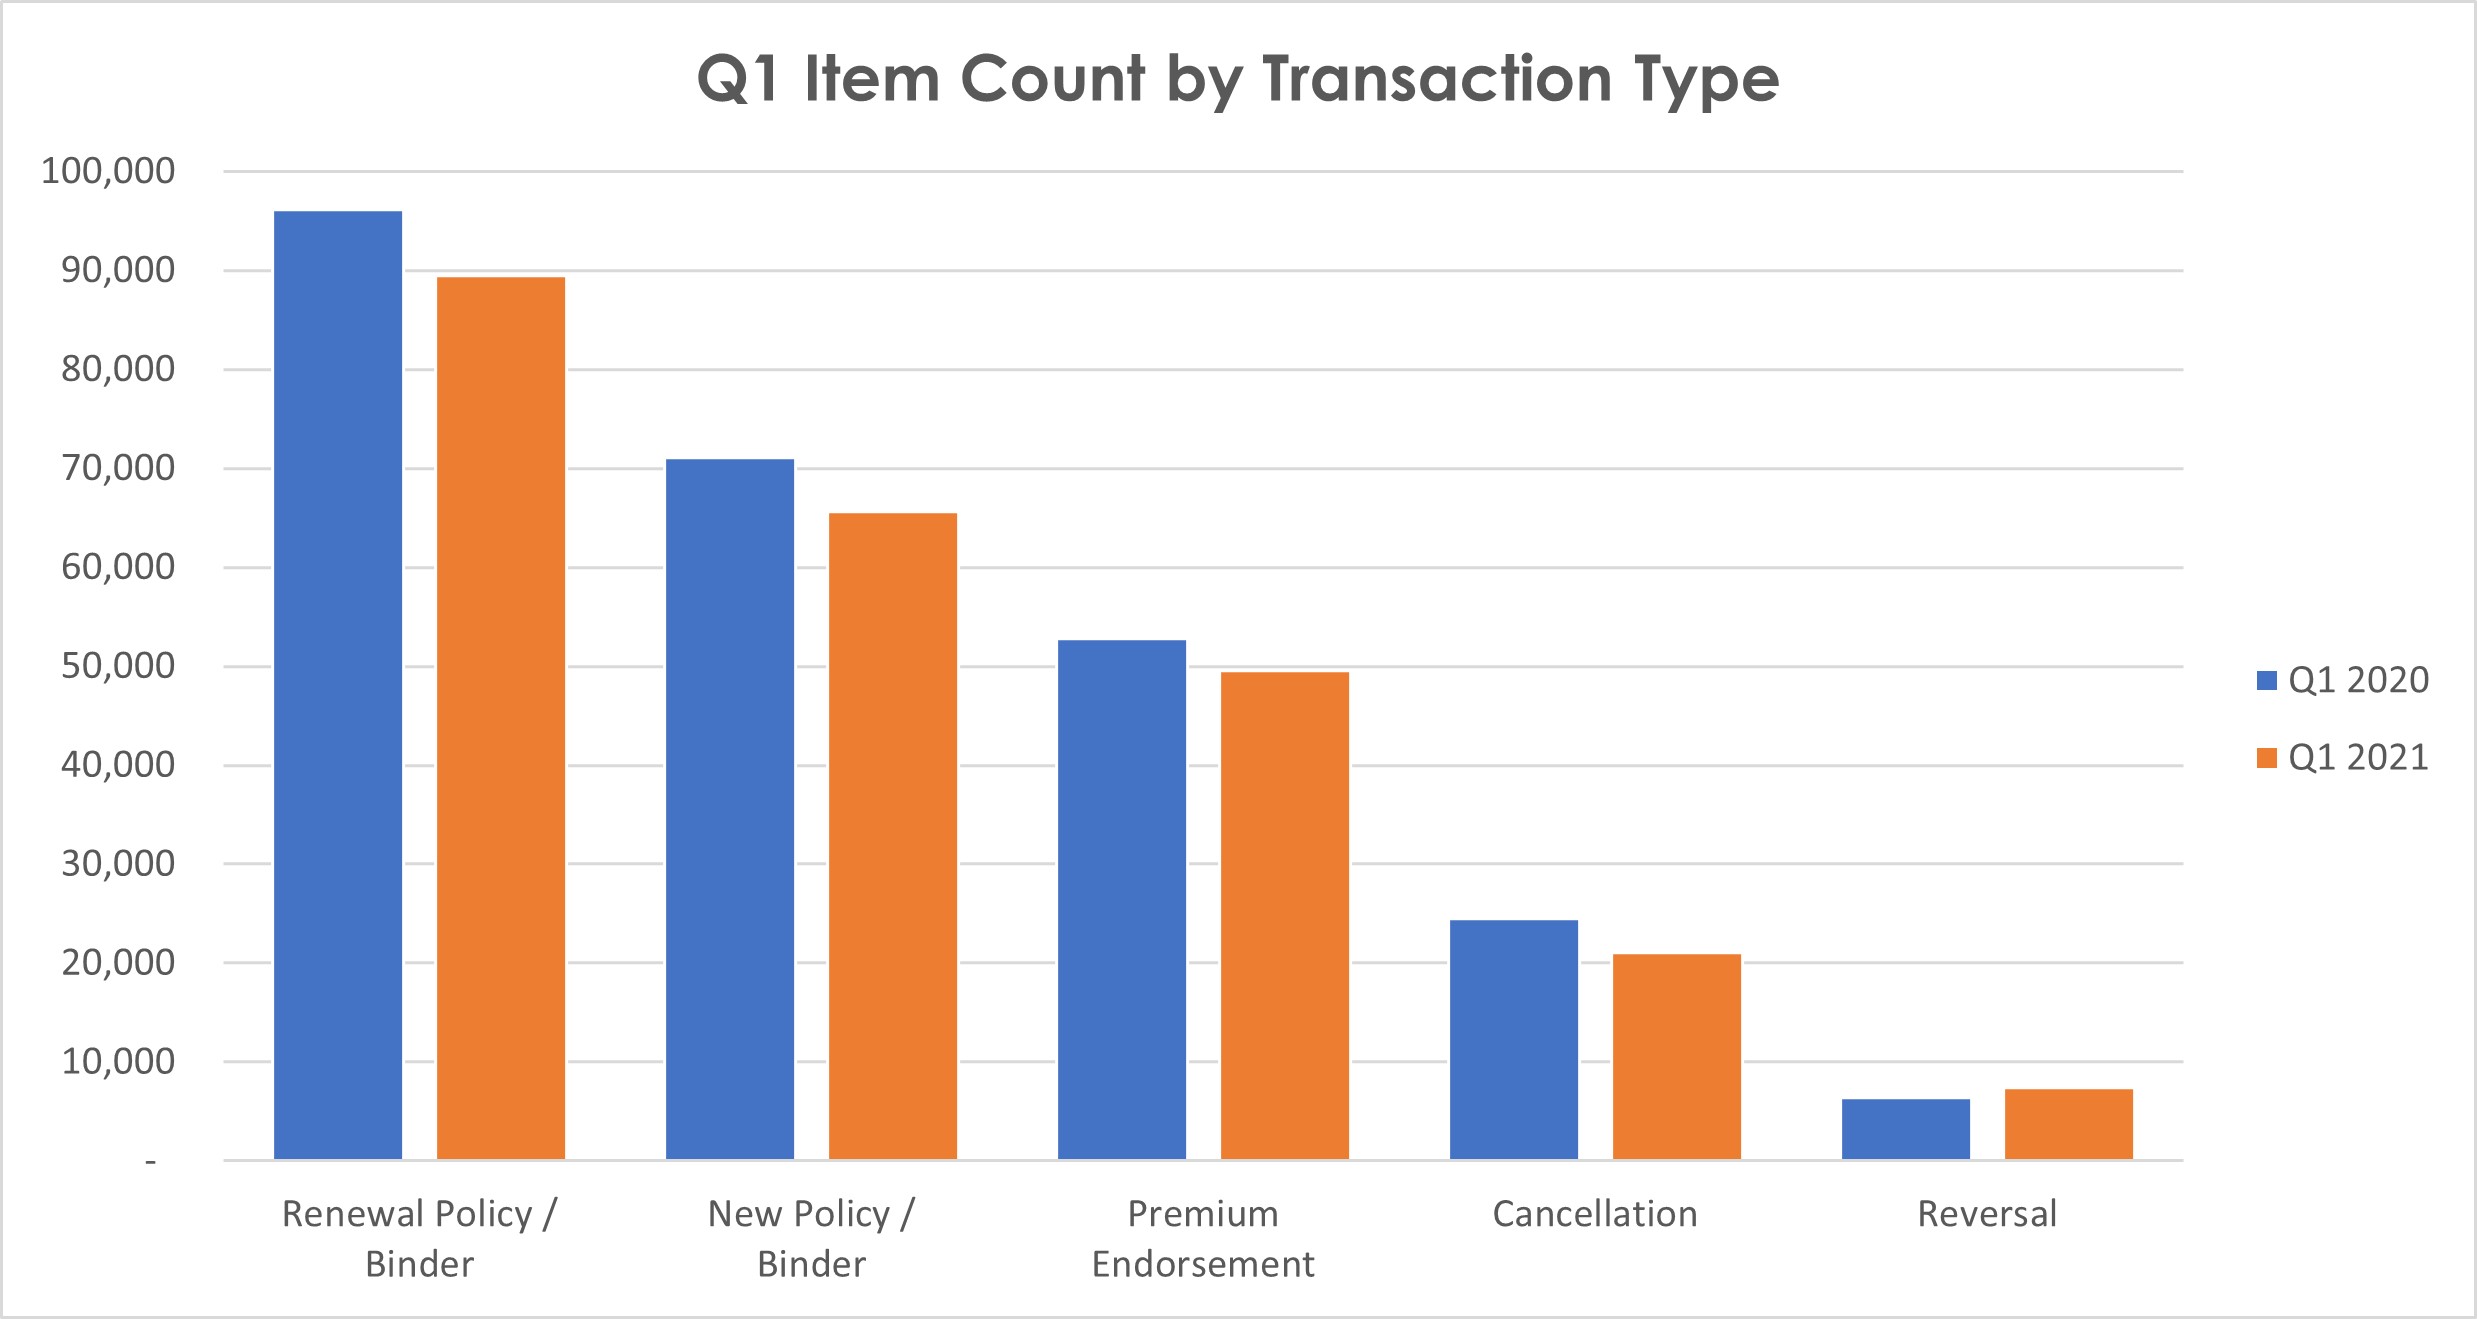 Q1 Item Count By Transaction Type